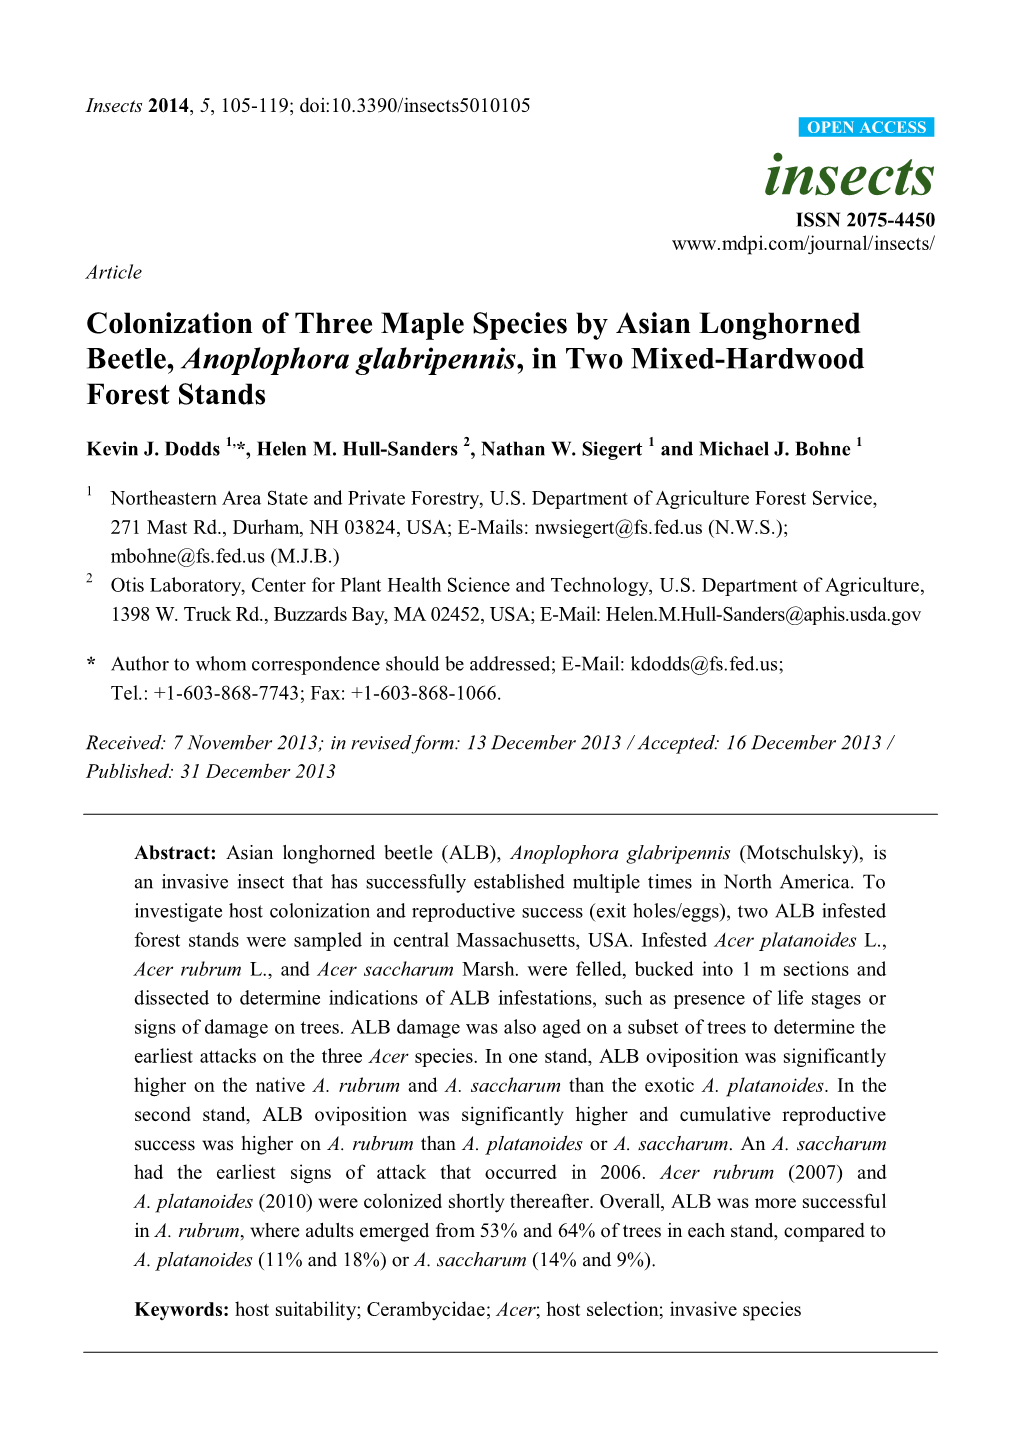 Colonization of Three Maple Species by Asian Longhorned Beetle, Anoplophora Glabripennis, in Two Mixed-Hardwood Forest Stands